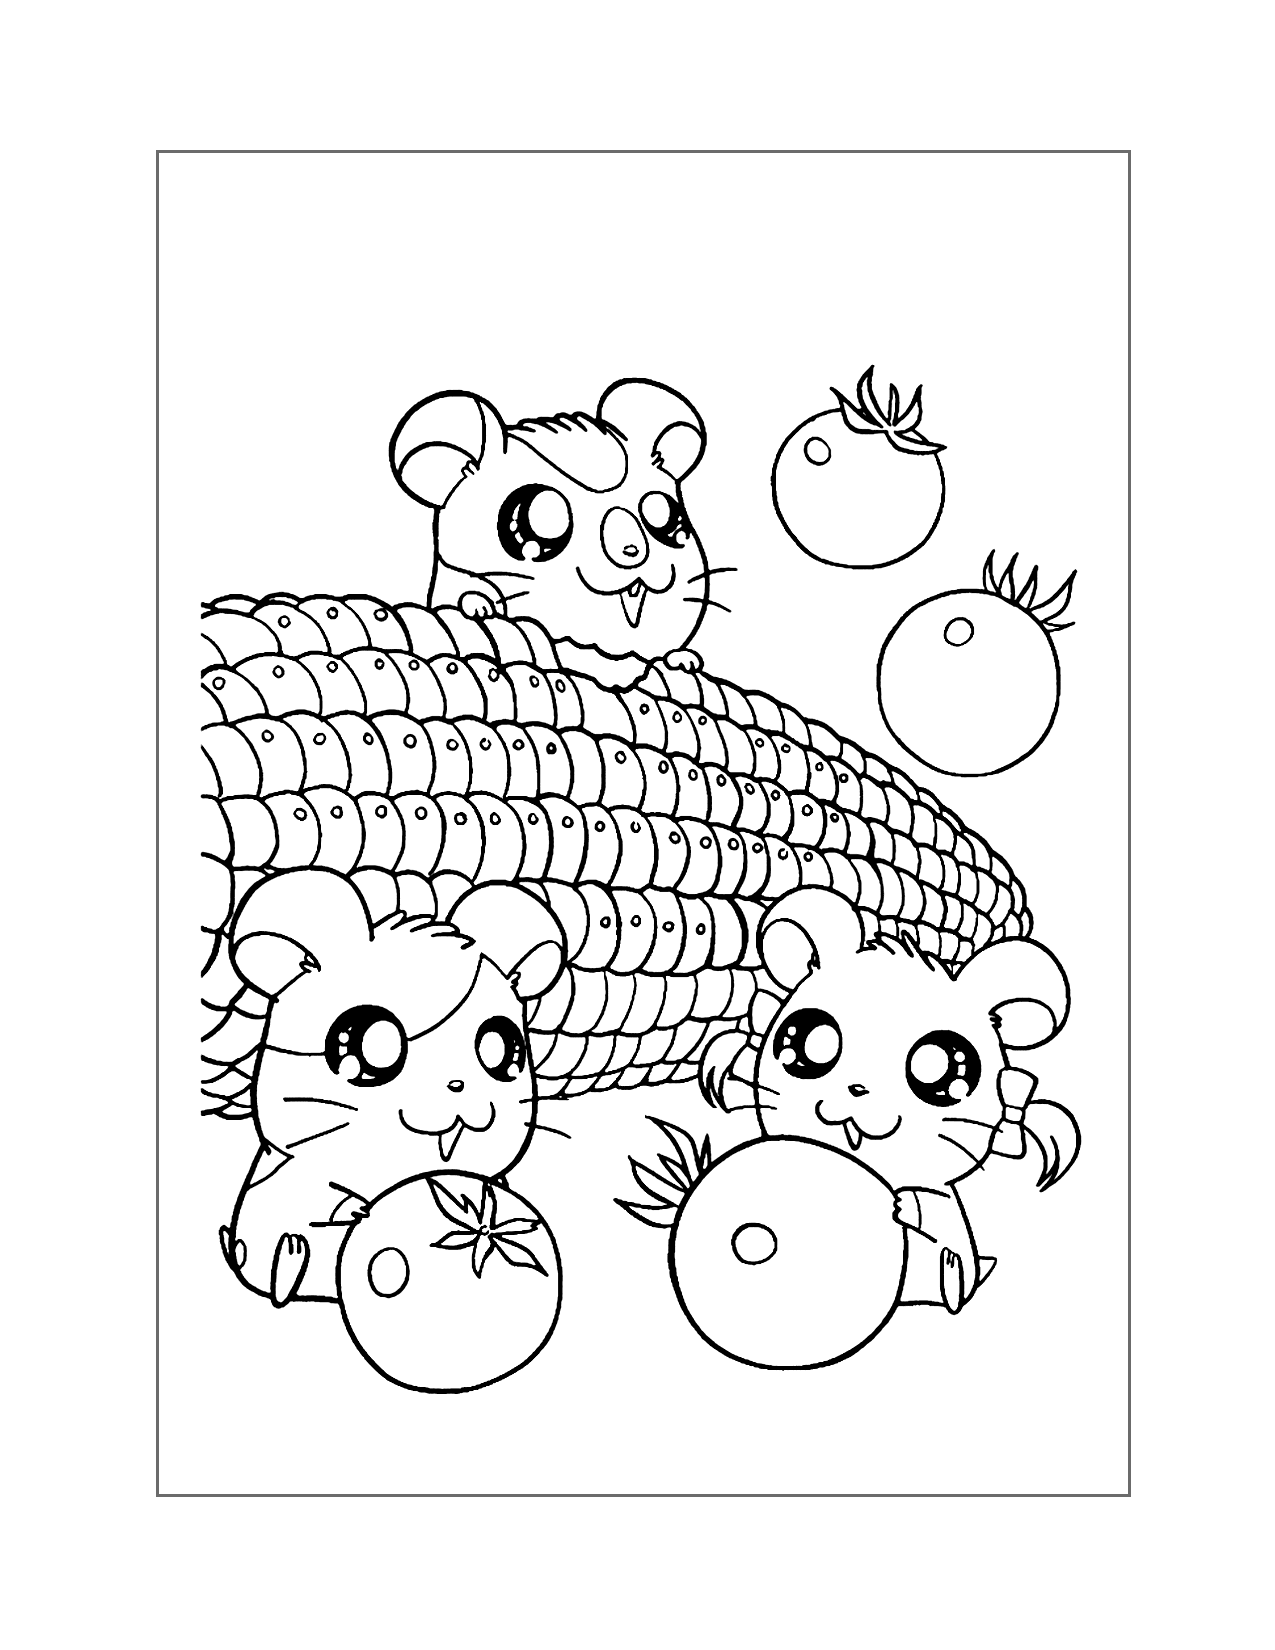 Hamsters Eating Corn Coloring Page